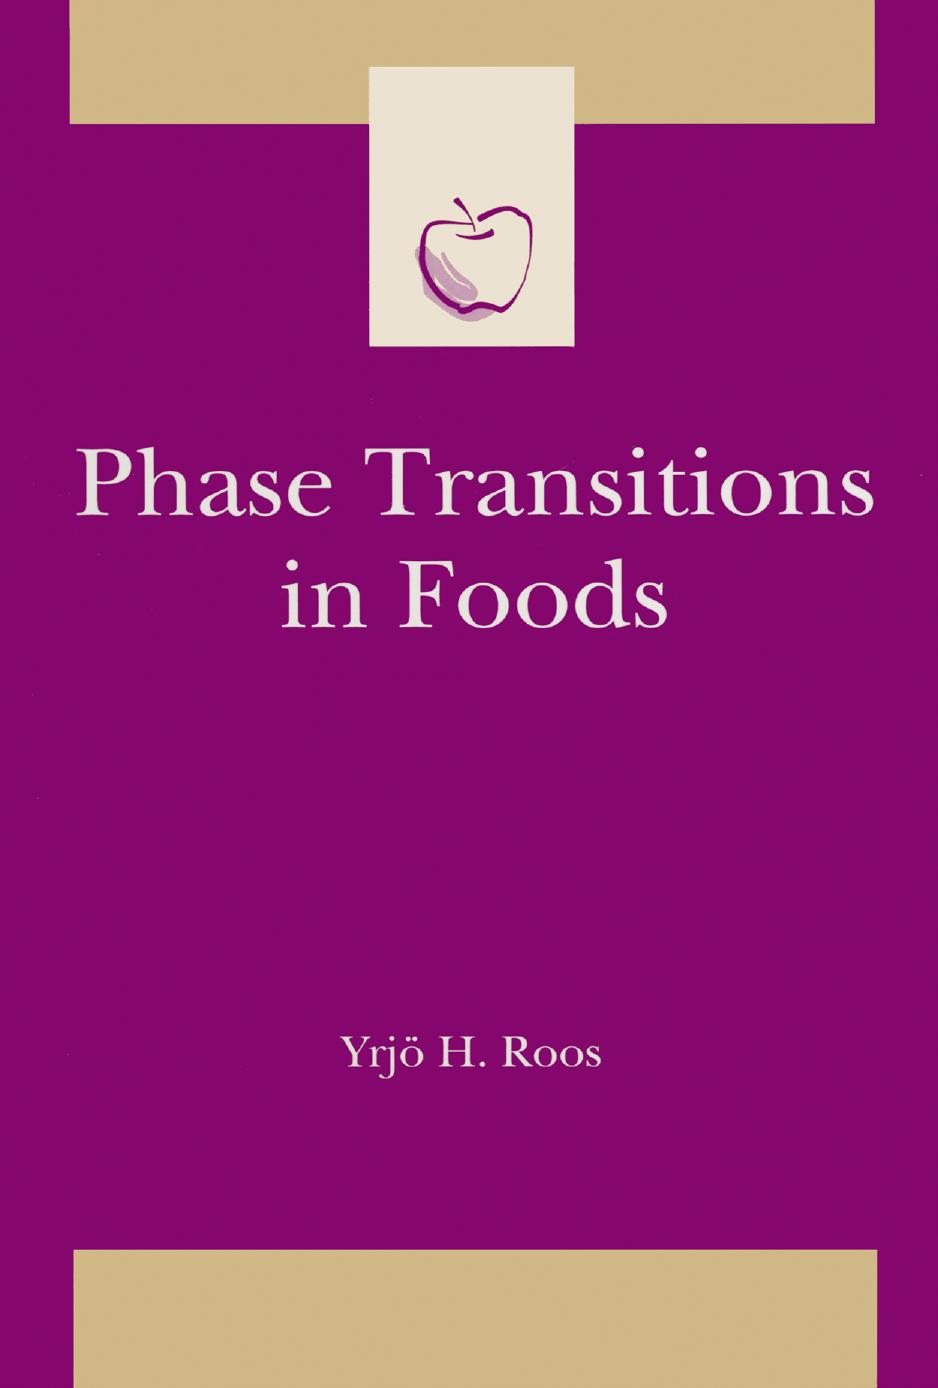 Phase Transitions in Foods (Food Science and Technology) (Food Science and Technology)  1995